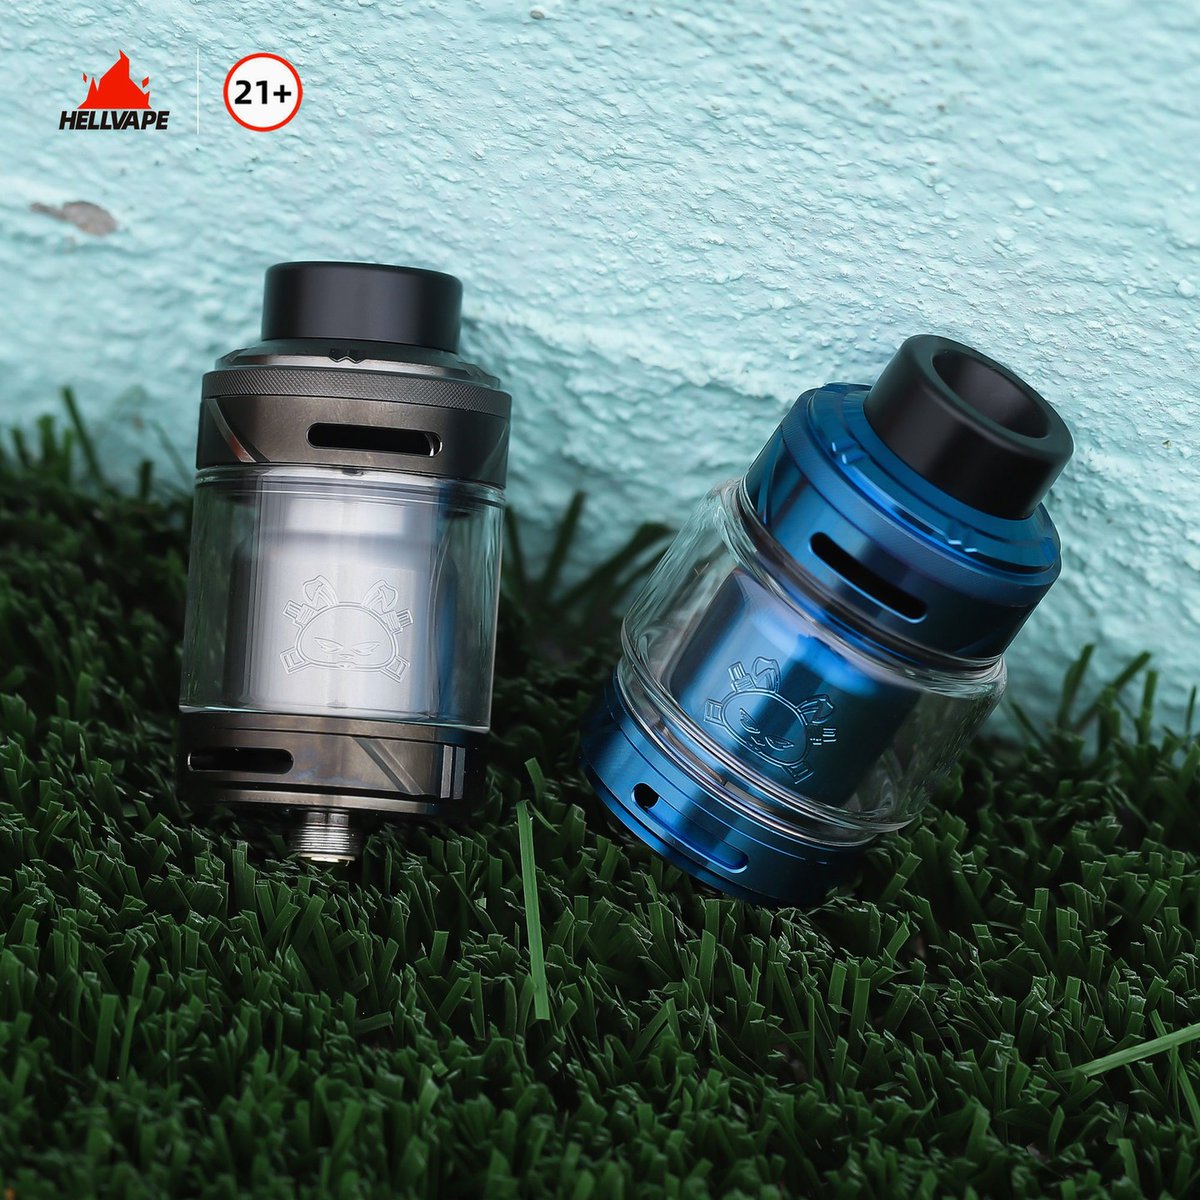 Hellvape Fat Rabbit 2 RTA With its sleek design and easy-to-use features, the Fat Rabbit 2 RTA is perfect for both beginners and seasoned vapers alike. 👏 ⚠ Warning: The device is used with e-liquid which contains addictive chemical nicotine. For Adult use only.